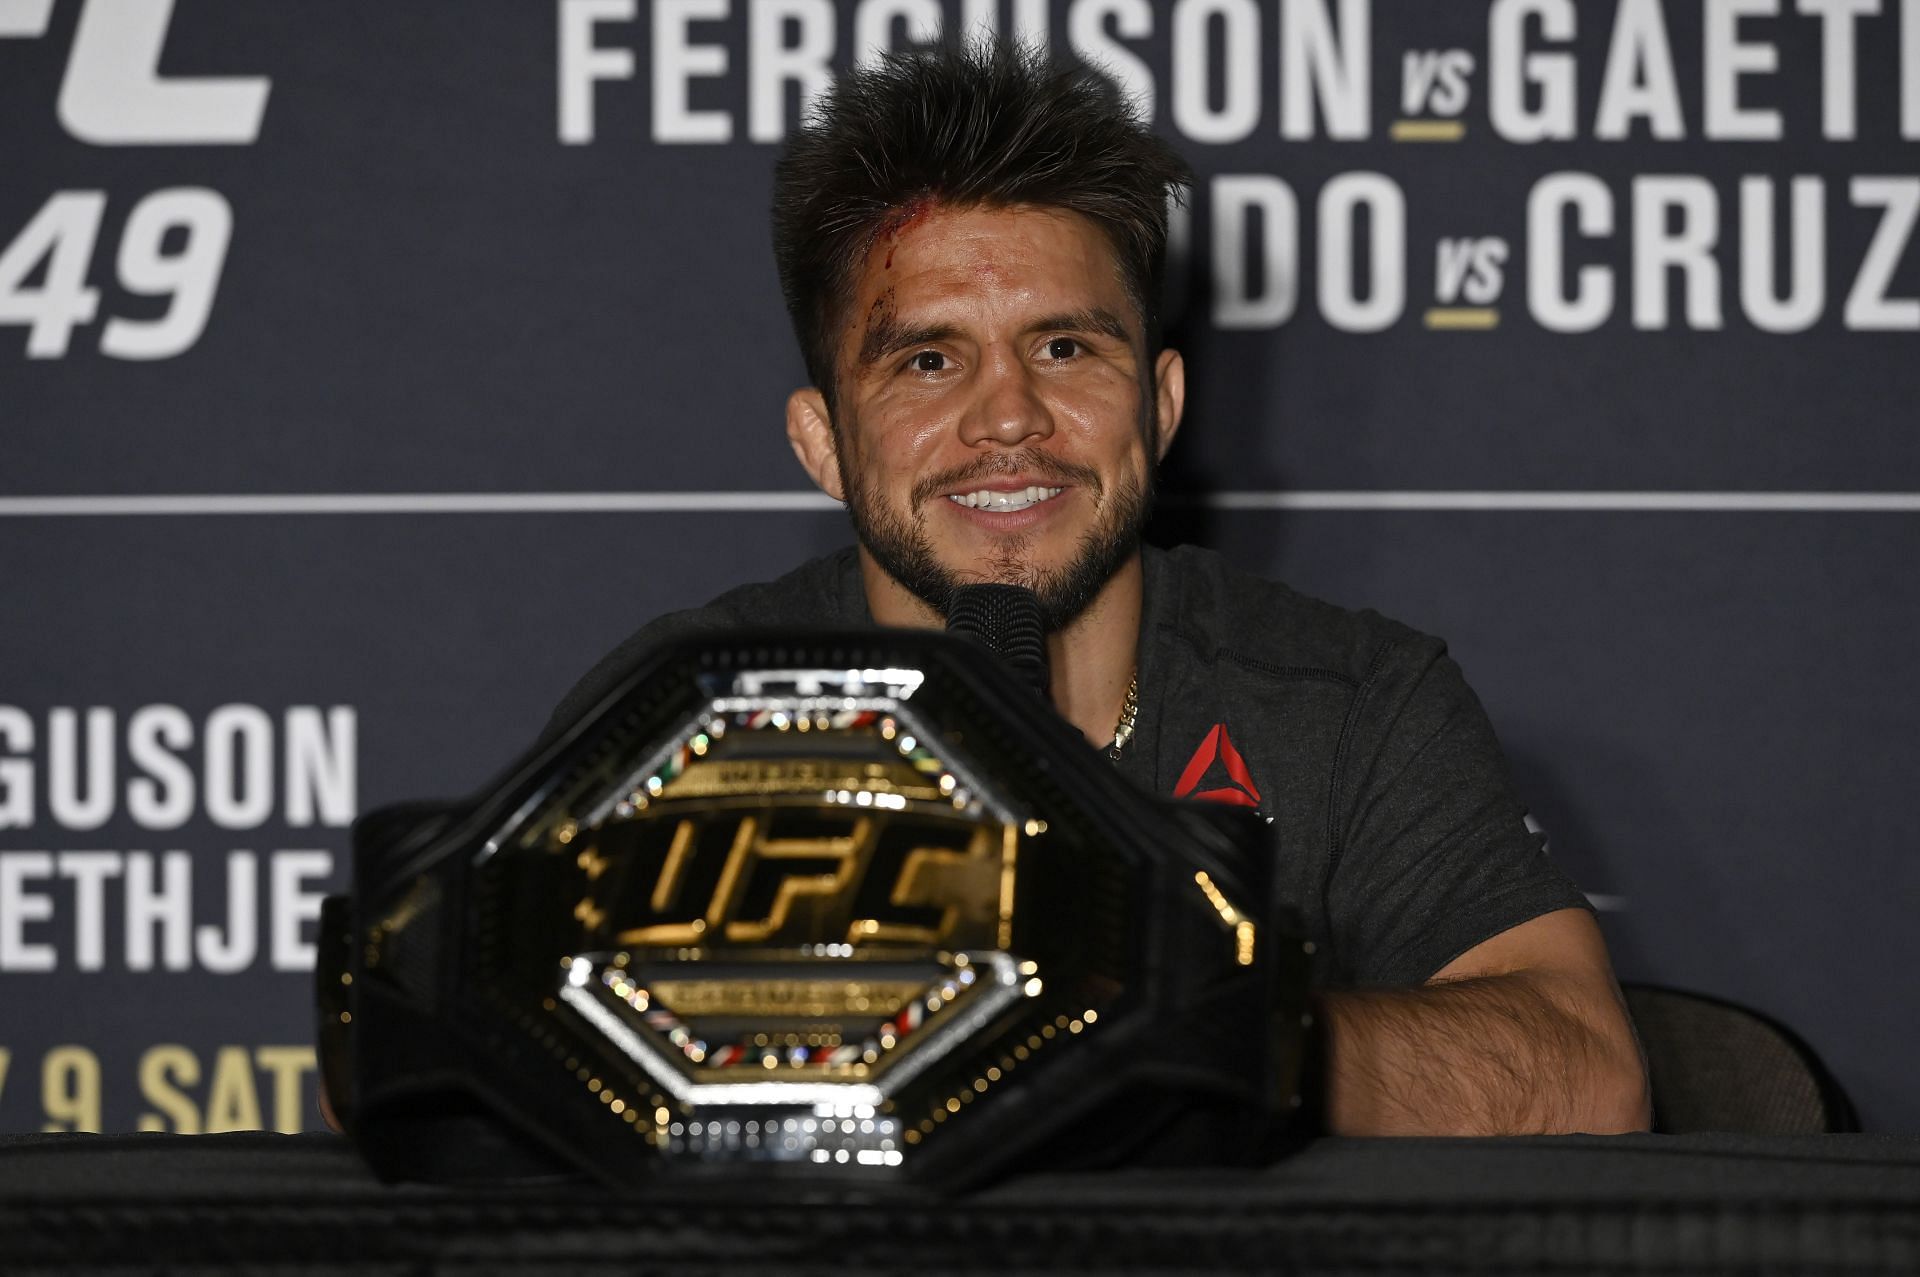 Henry Cejudo has not fought since May 2020